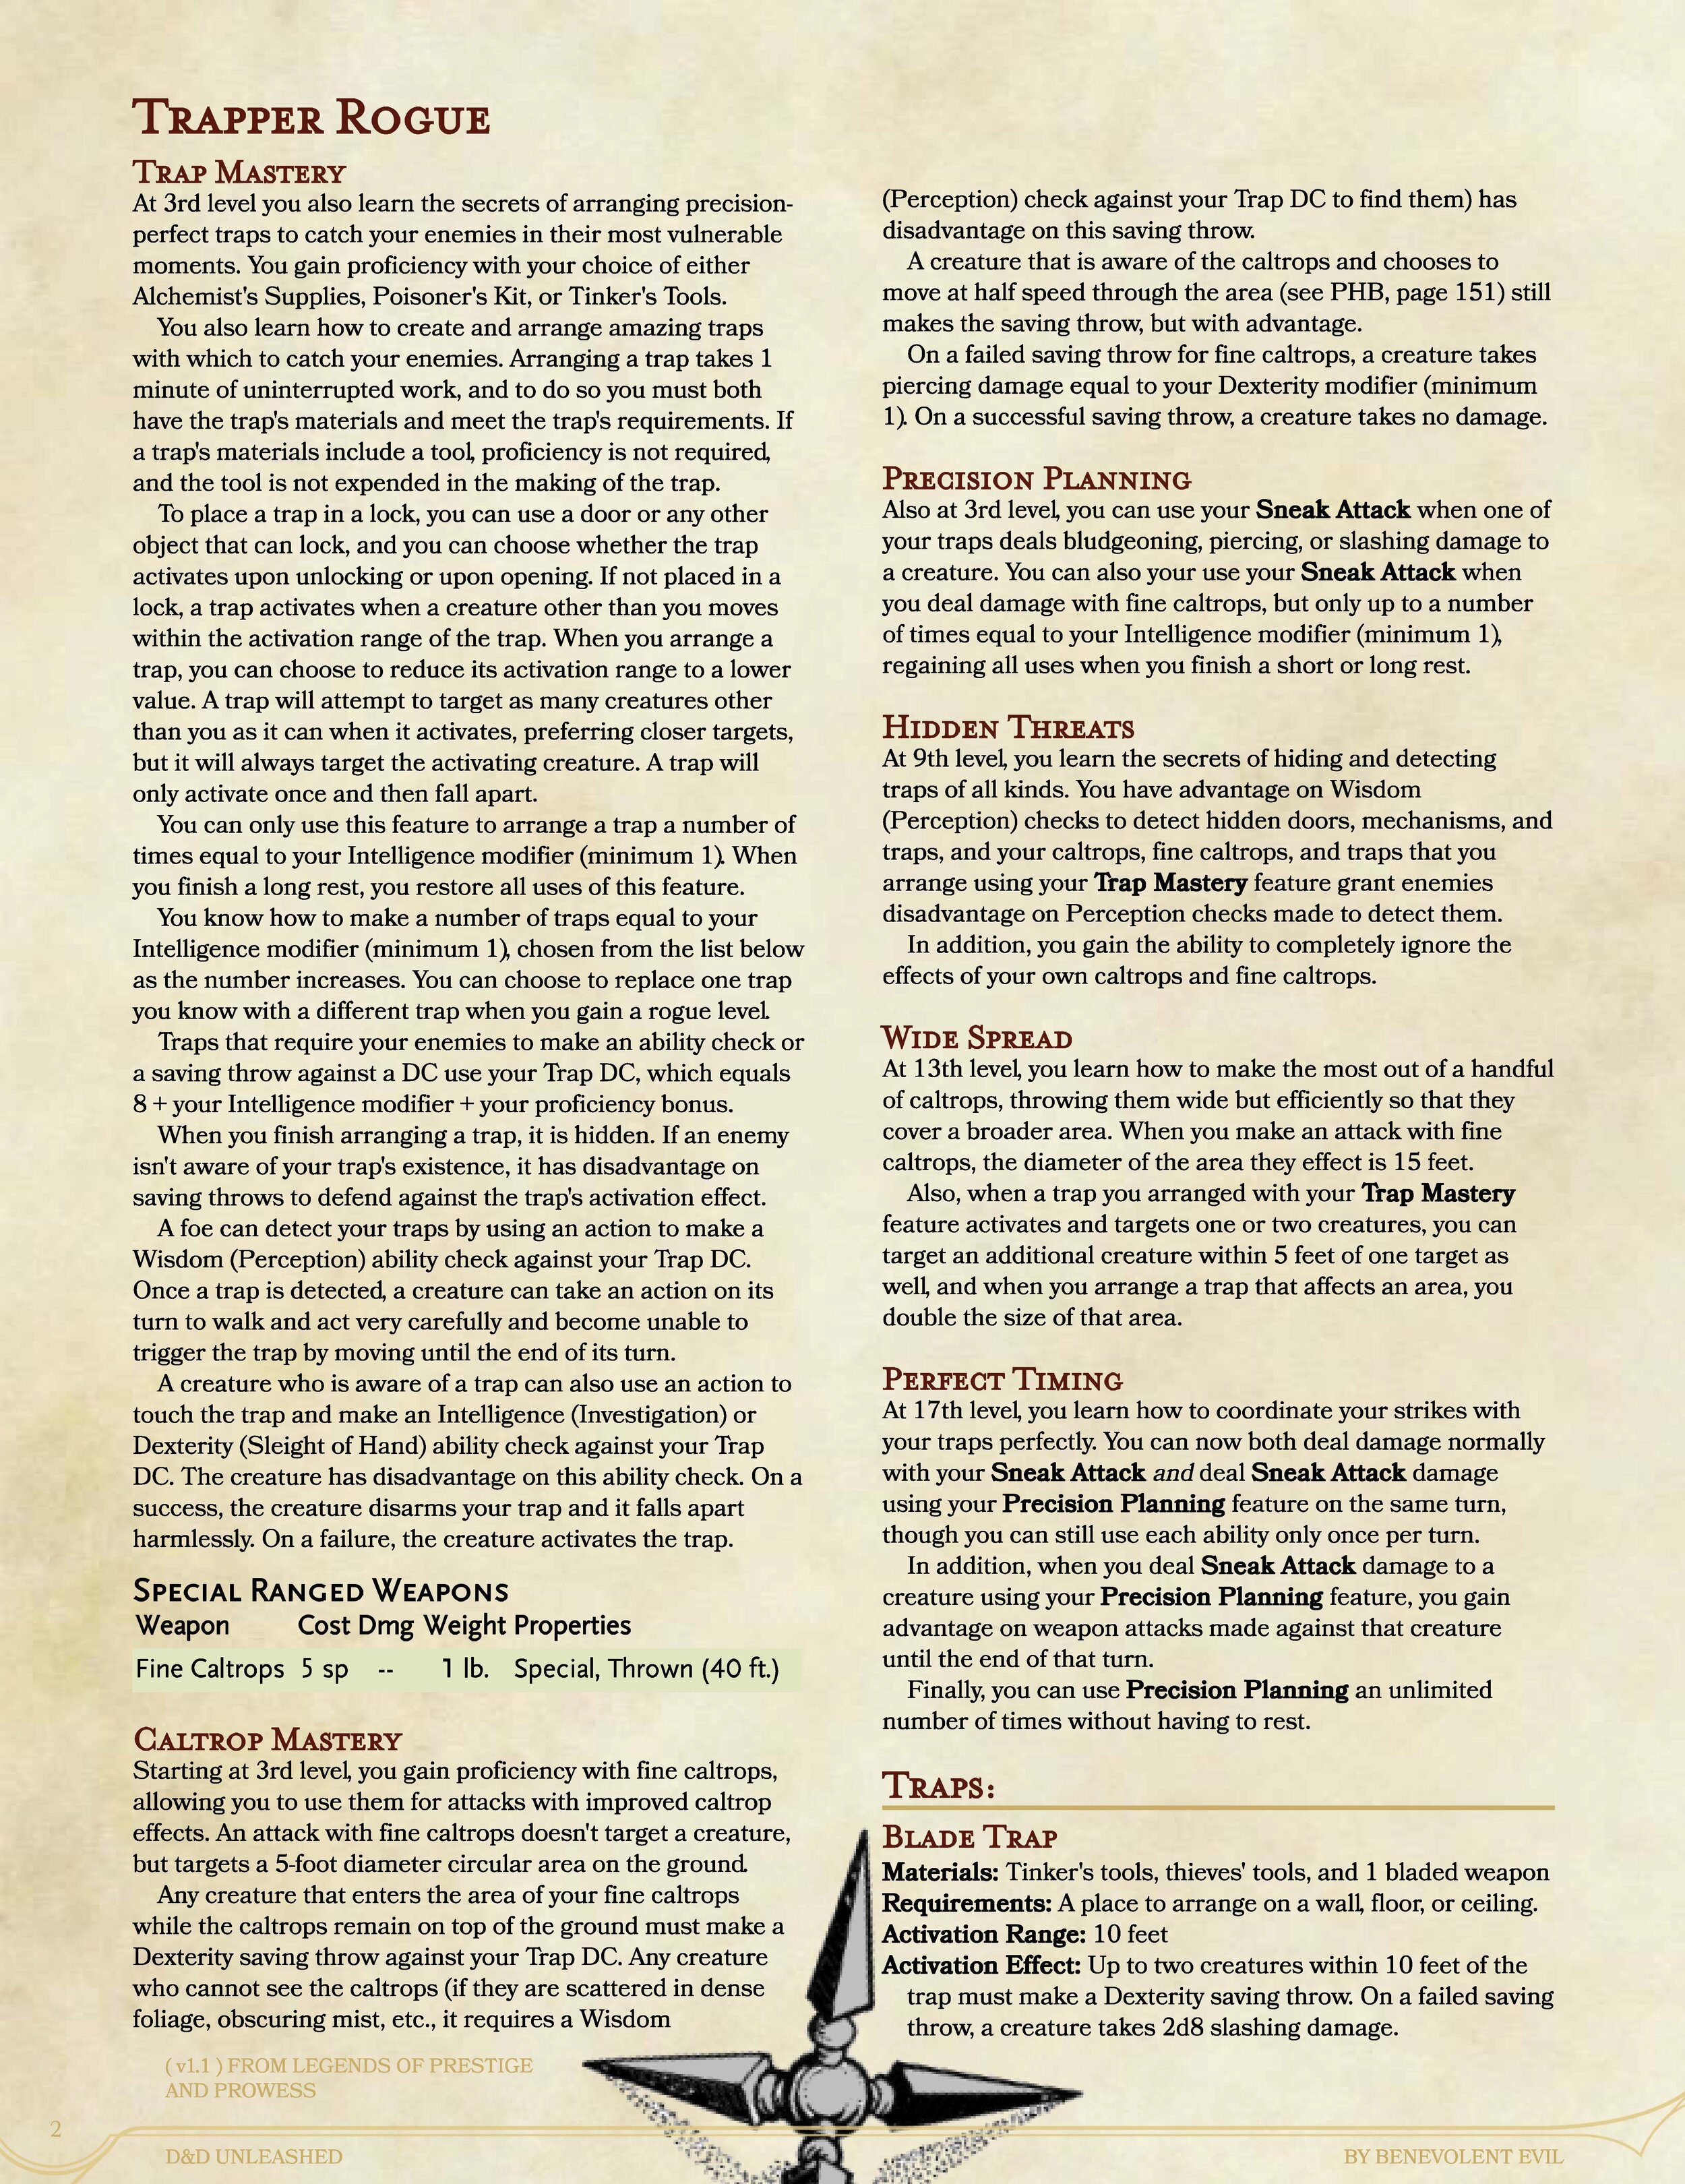 D&D Unleashed - Wrangler and Trapper Subclasses (1p1)_Page_2.jpg